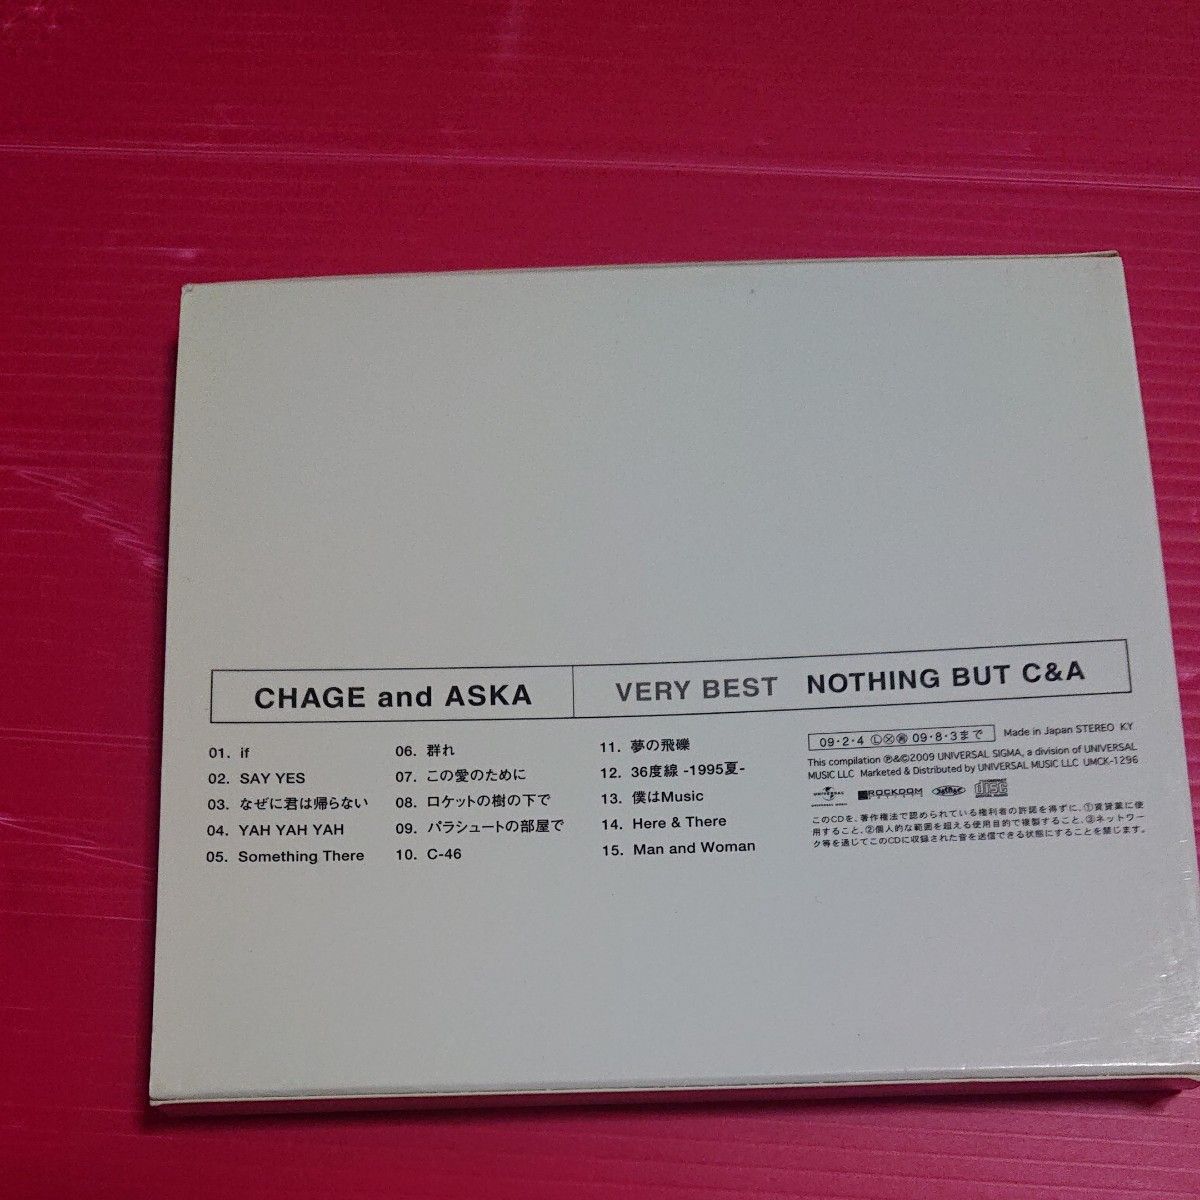 CHAGE and ASKA チャゲ&飛鳥 チャゲアス VERY BEST NOTHING BUT C&A スリーブケース付き 